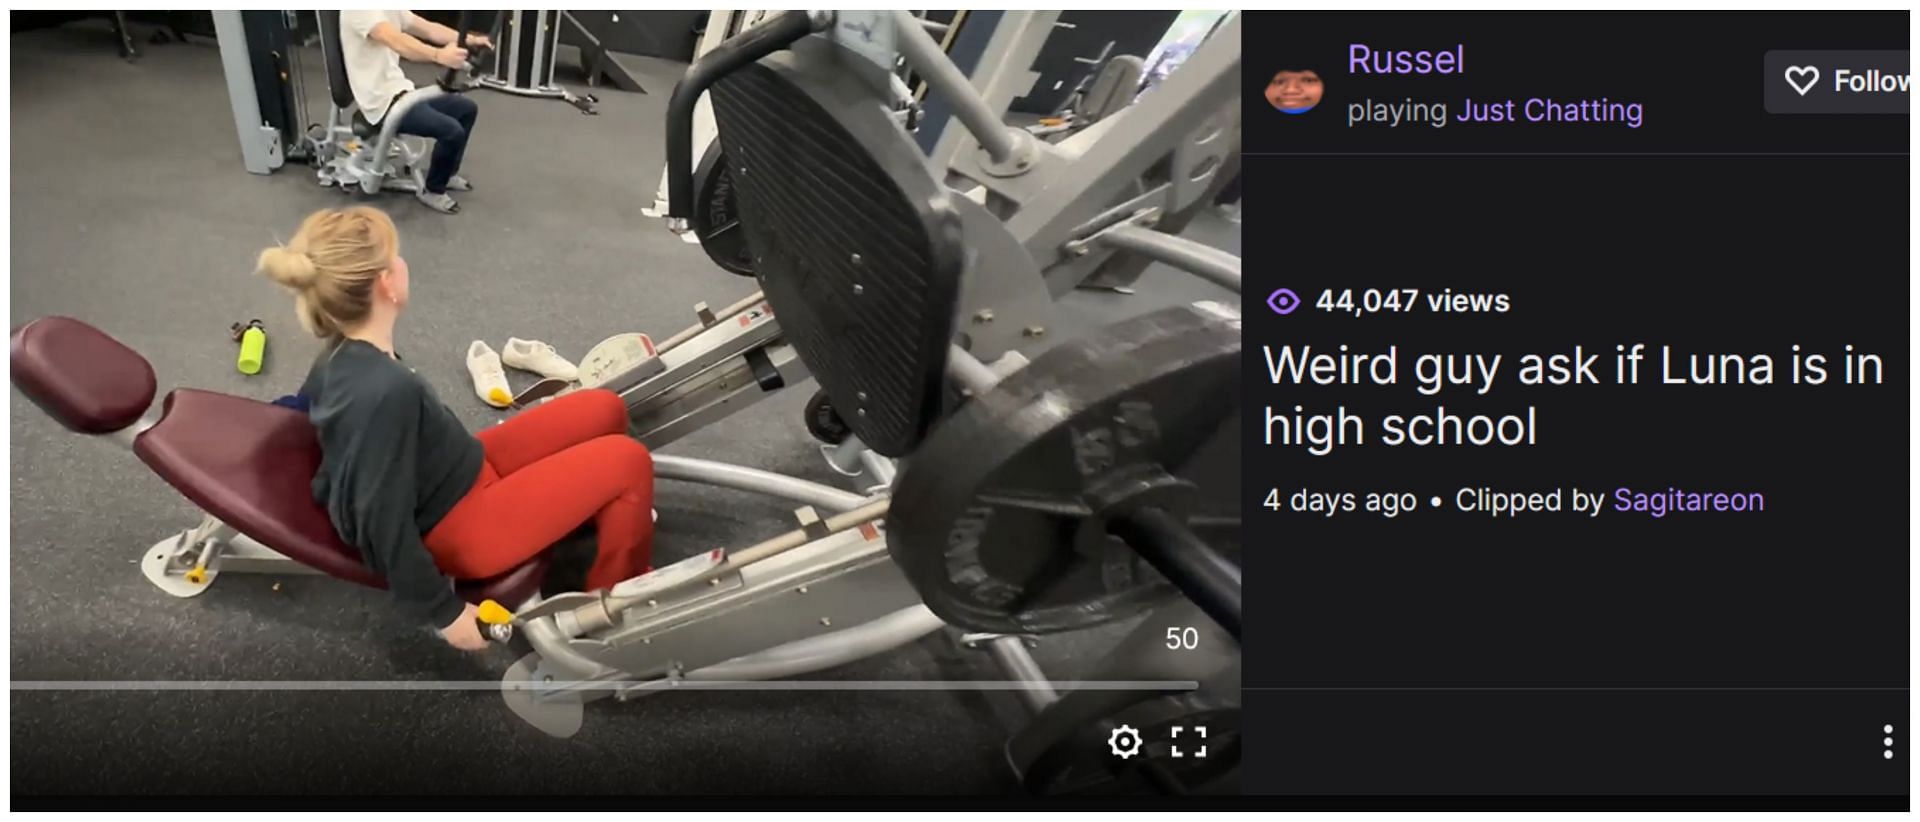 Luna had a creepy moment in the gym (Image via Twitch TV/Russel)